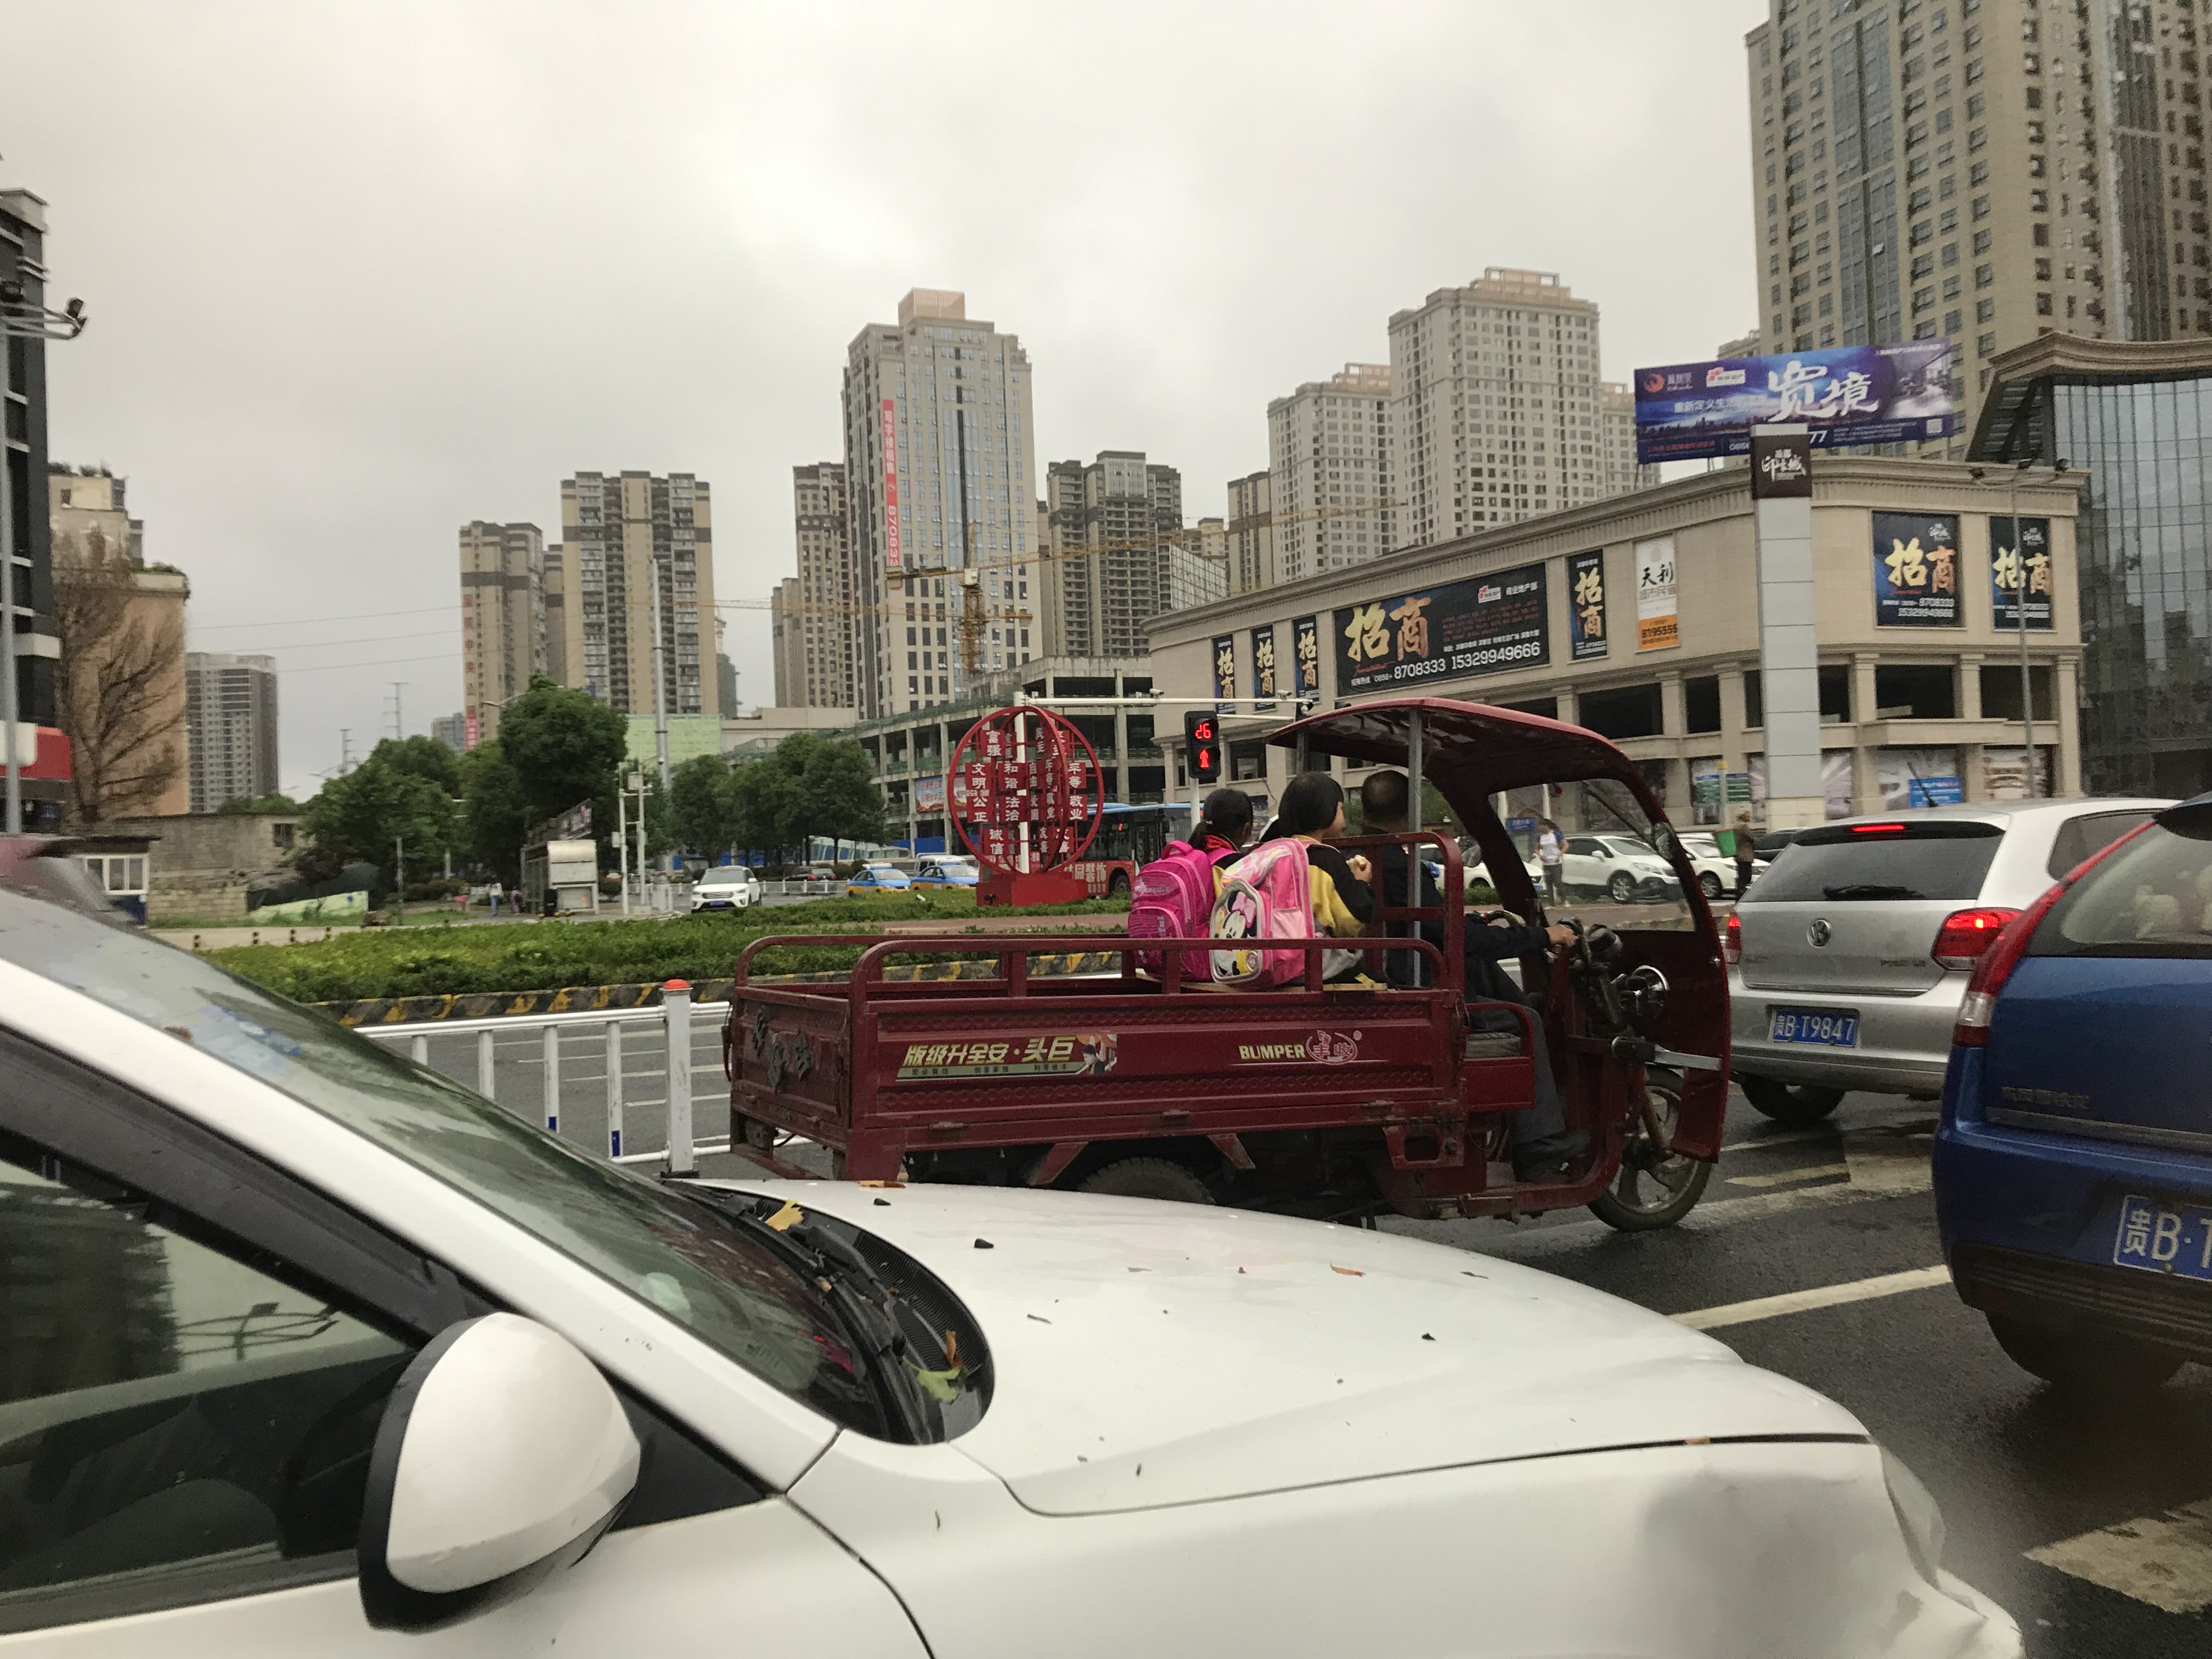 Musings from my trip to China.